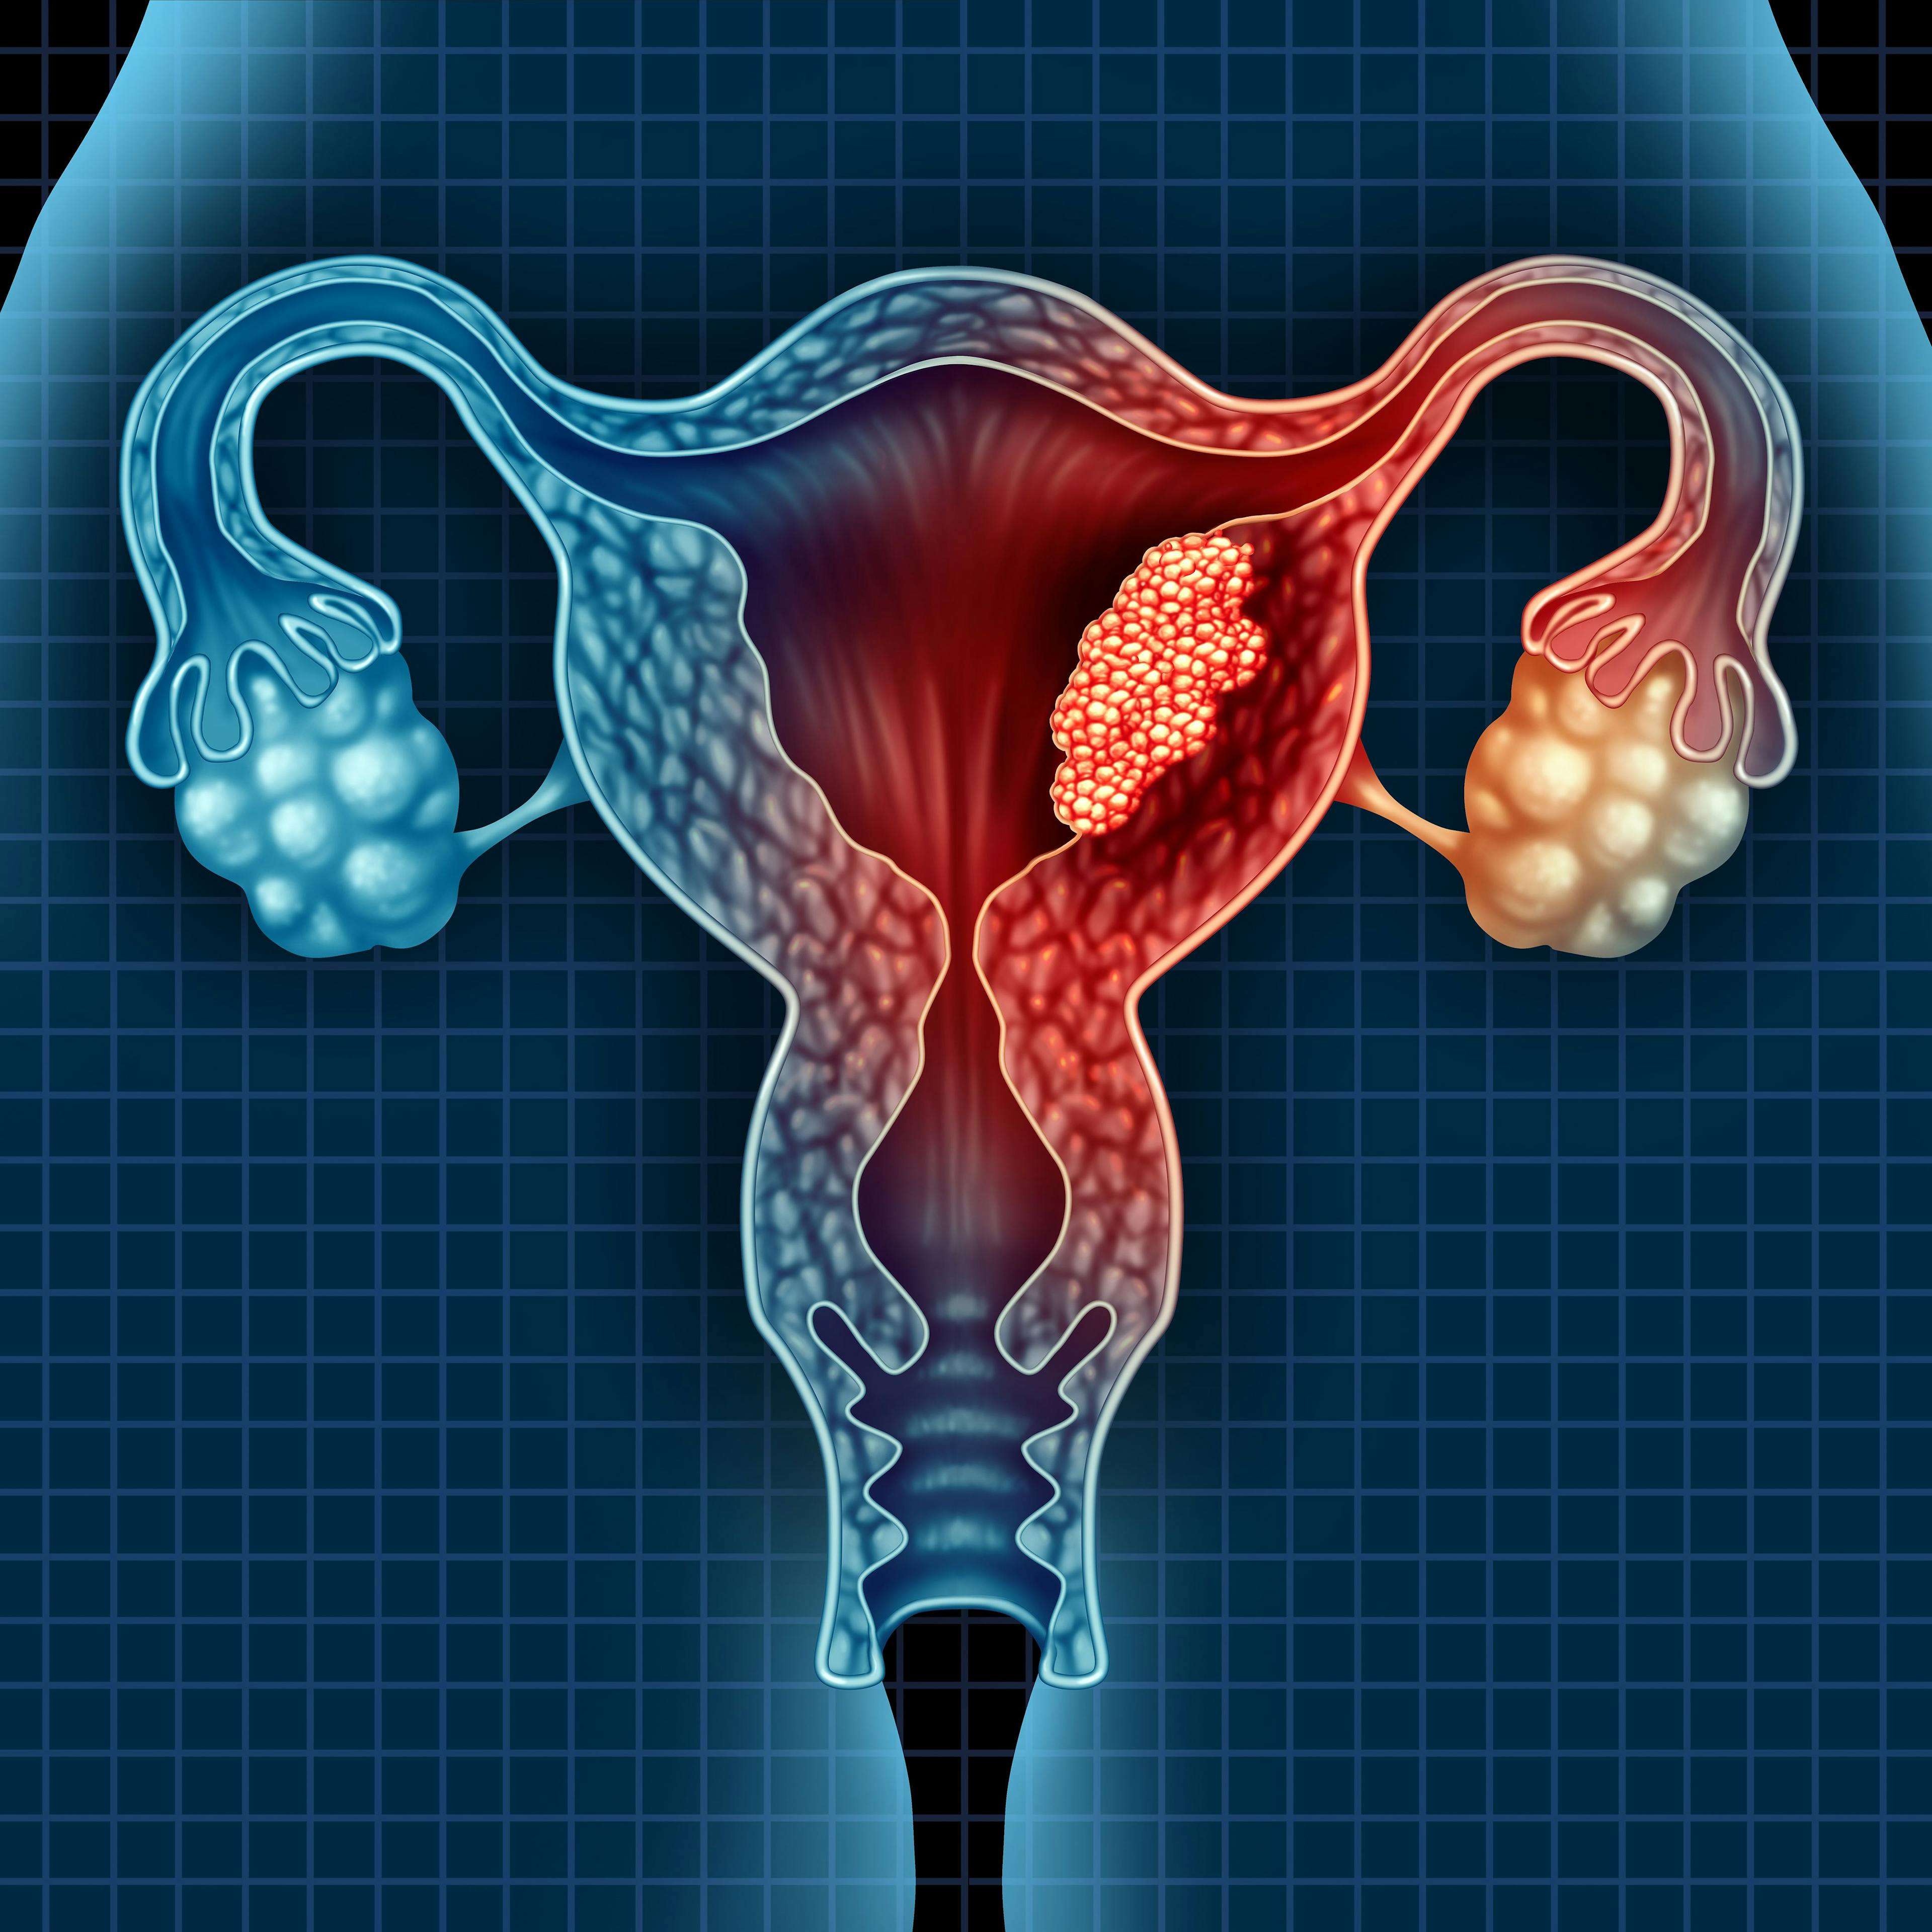 Waiting Time for Ovarian Cancer Treatment Found to be Longer Than Almost all Other Malignancies